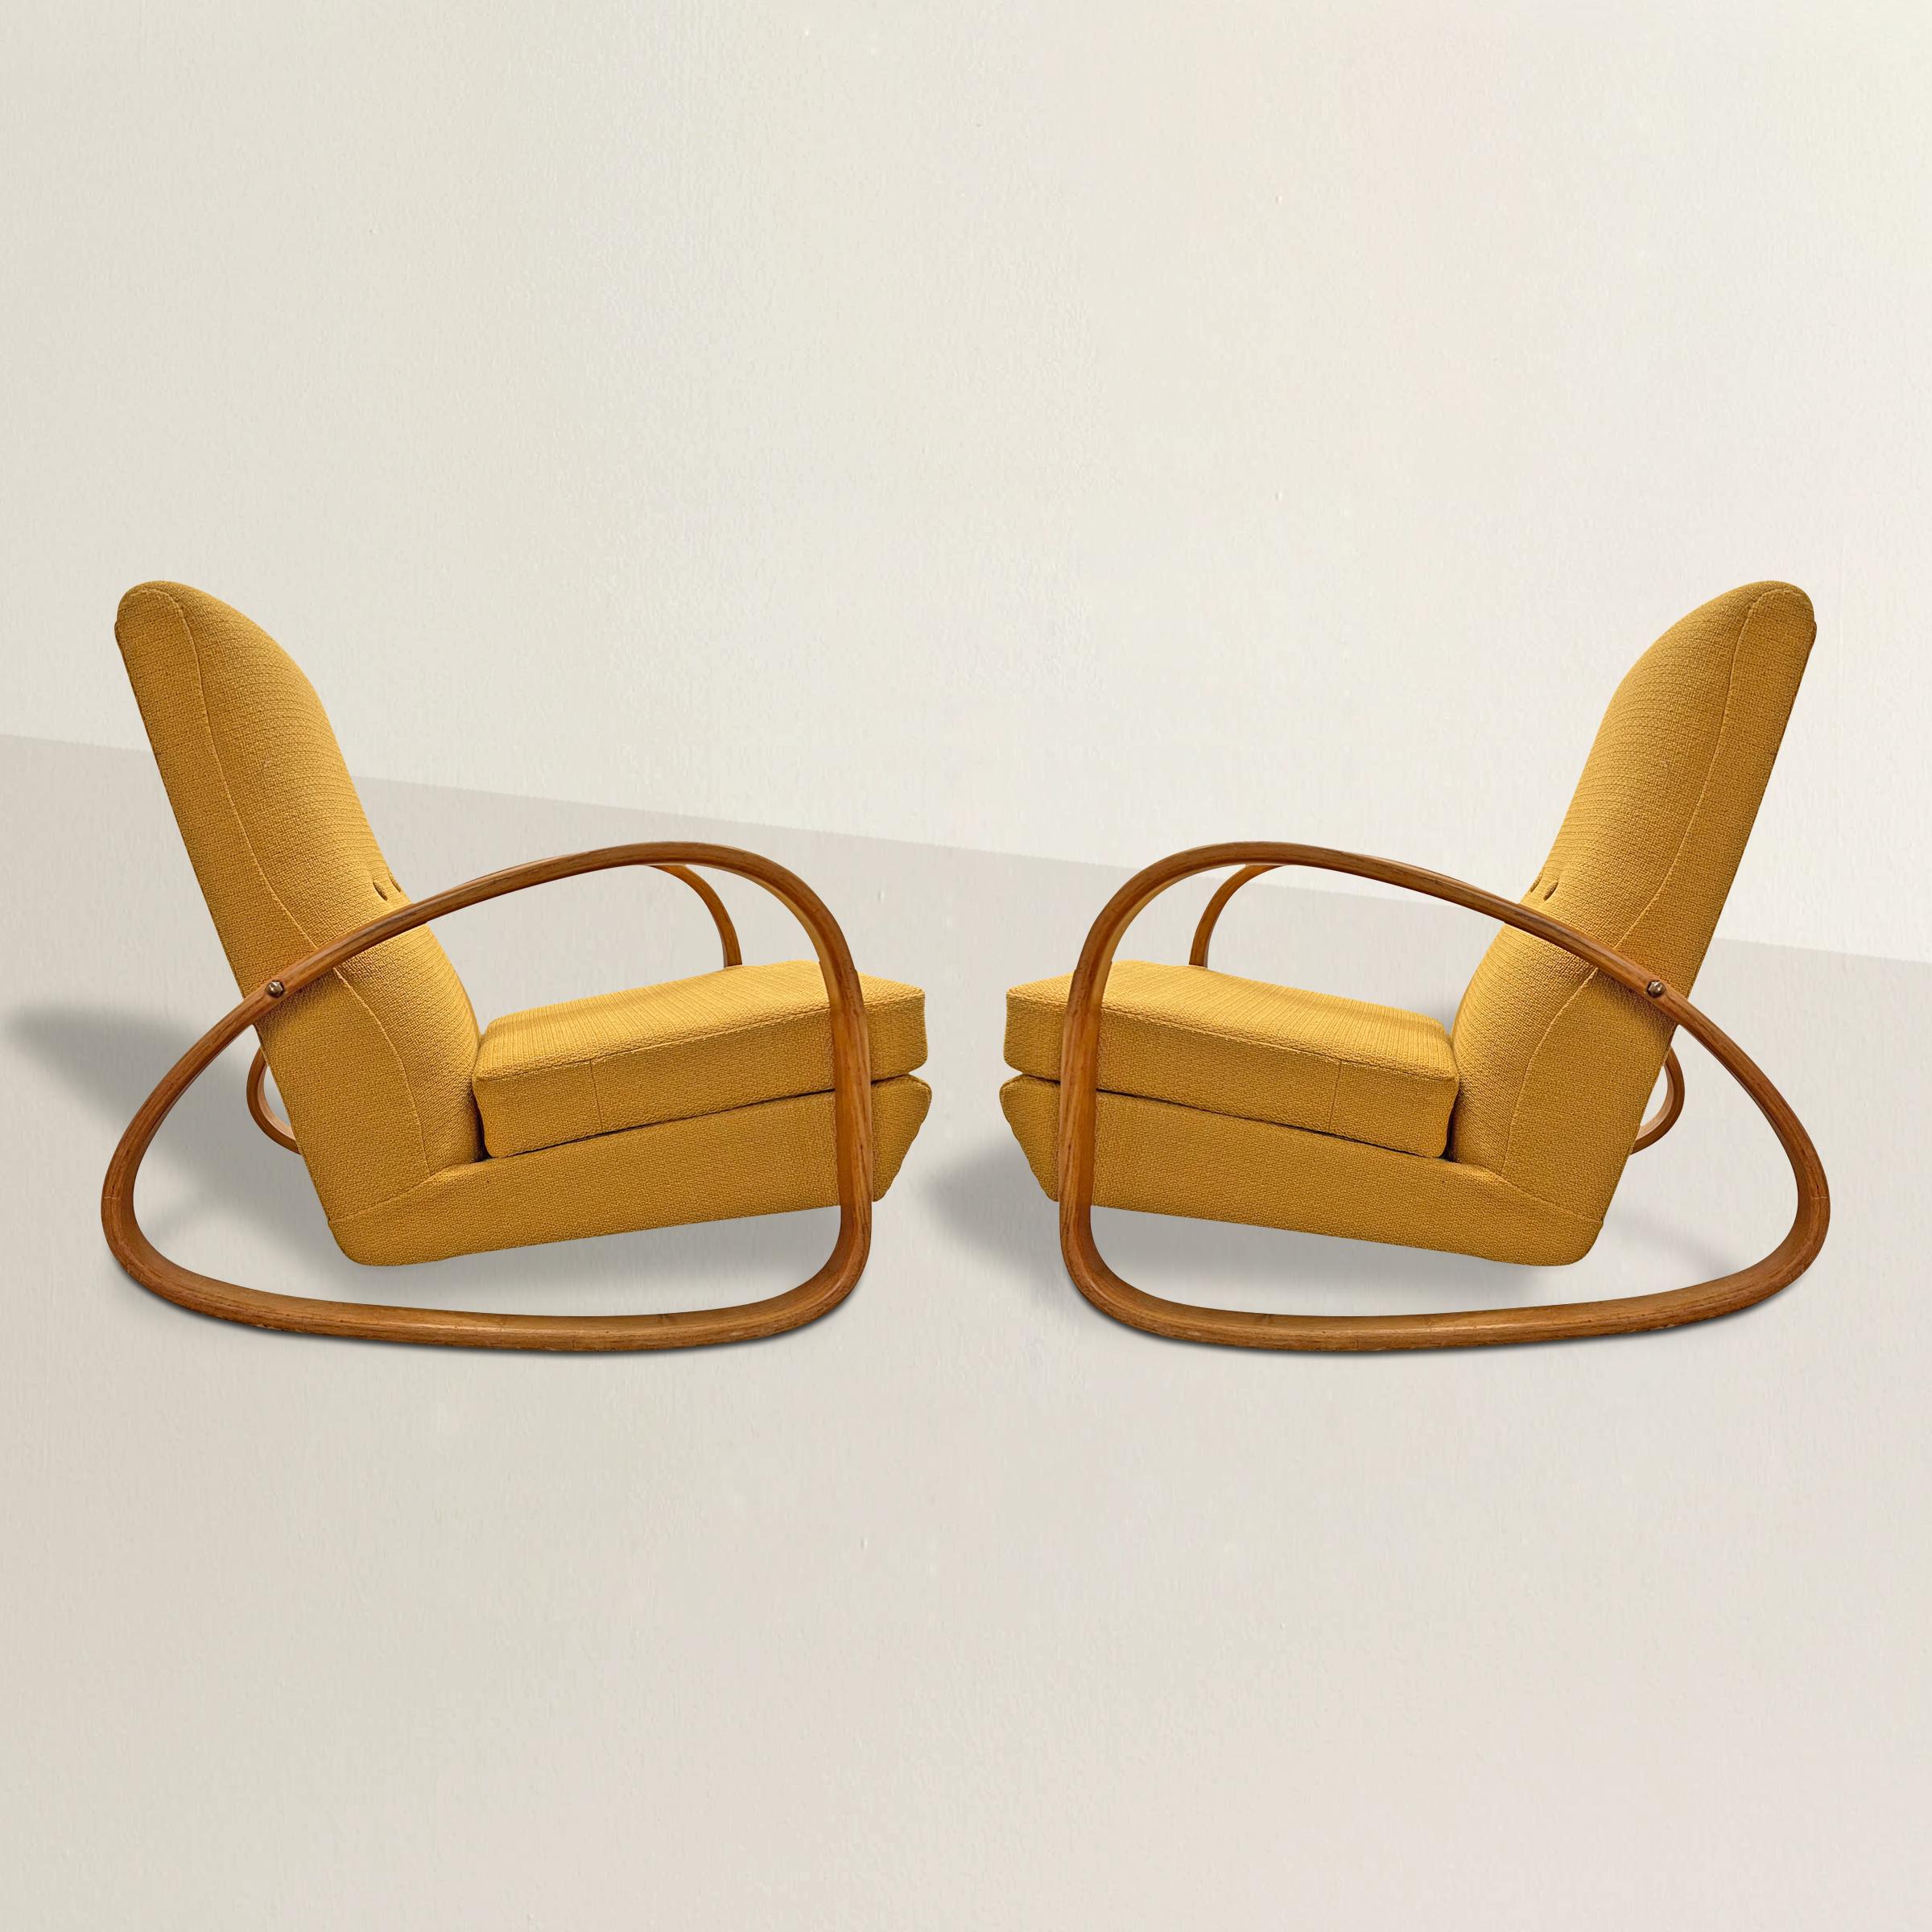 A chic pair of mid-20th century American rocking armchairs with continuous bent oak arms that turn into the rocking stretchers, and newly upholster in a period-appropriate goldenrod chunky wool fabric. These chairs sit like a lounge chair with the